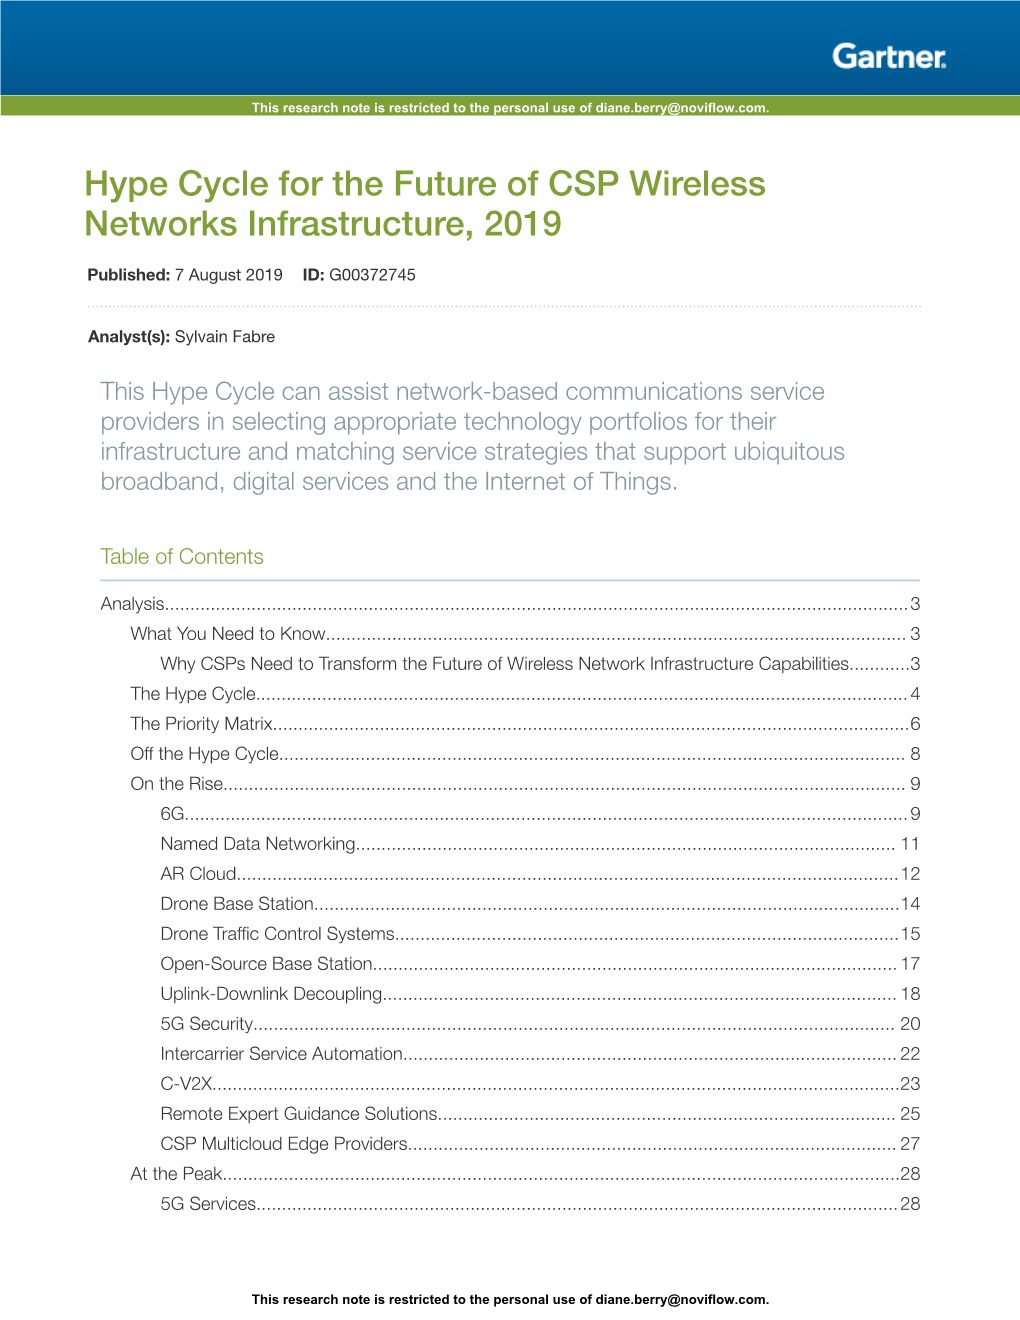 Hype Cycle for the Future of CSP Wireless Networks Infrastructure, 2019